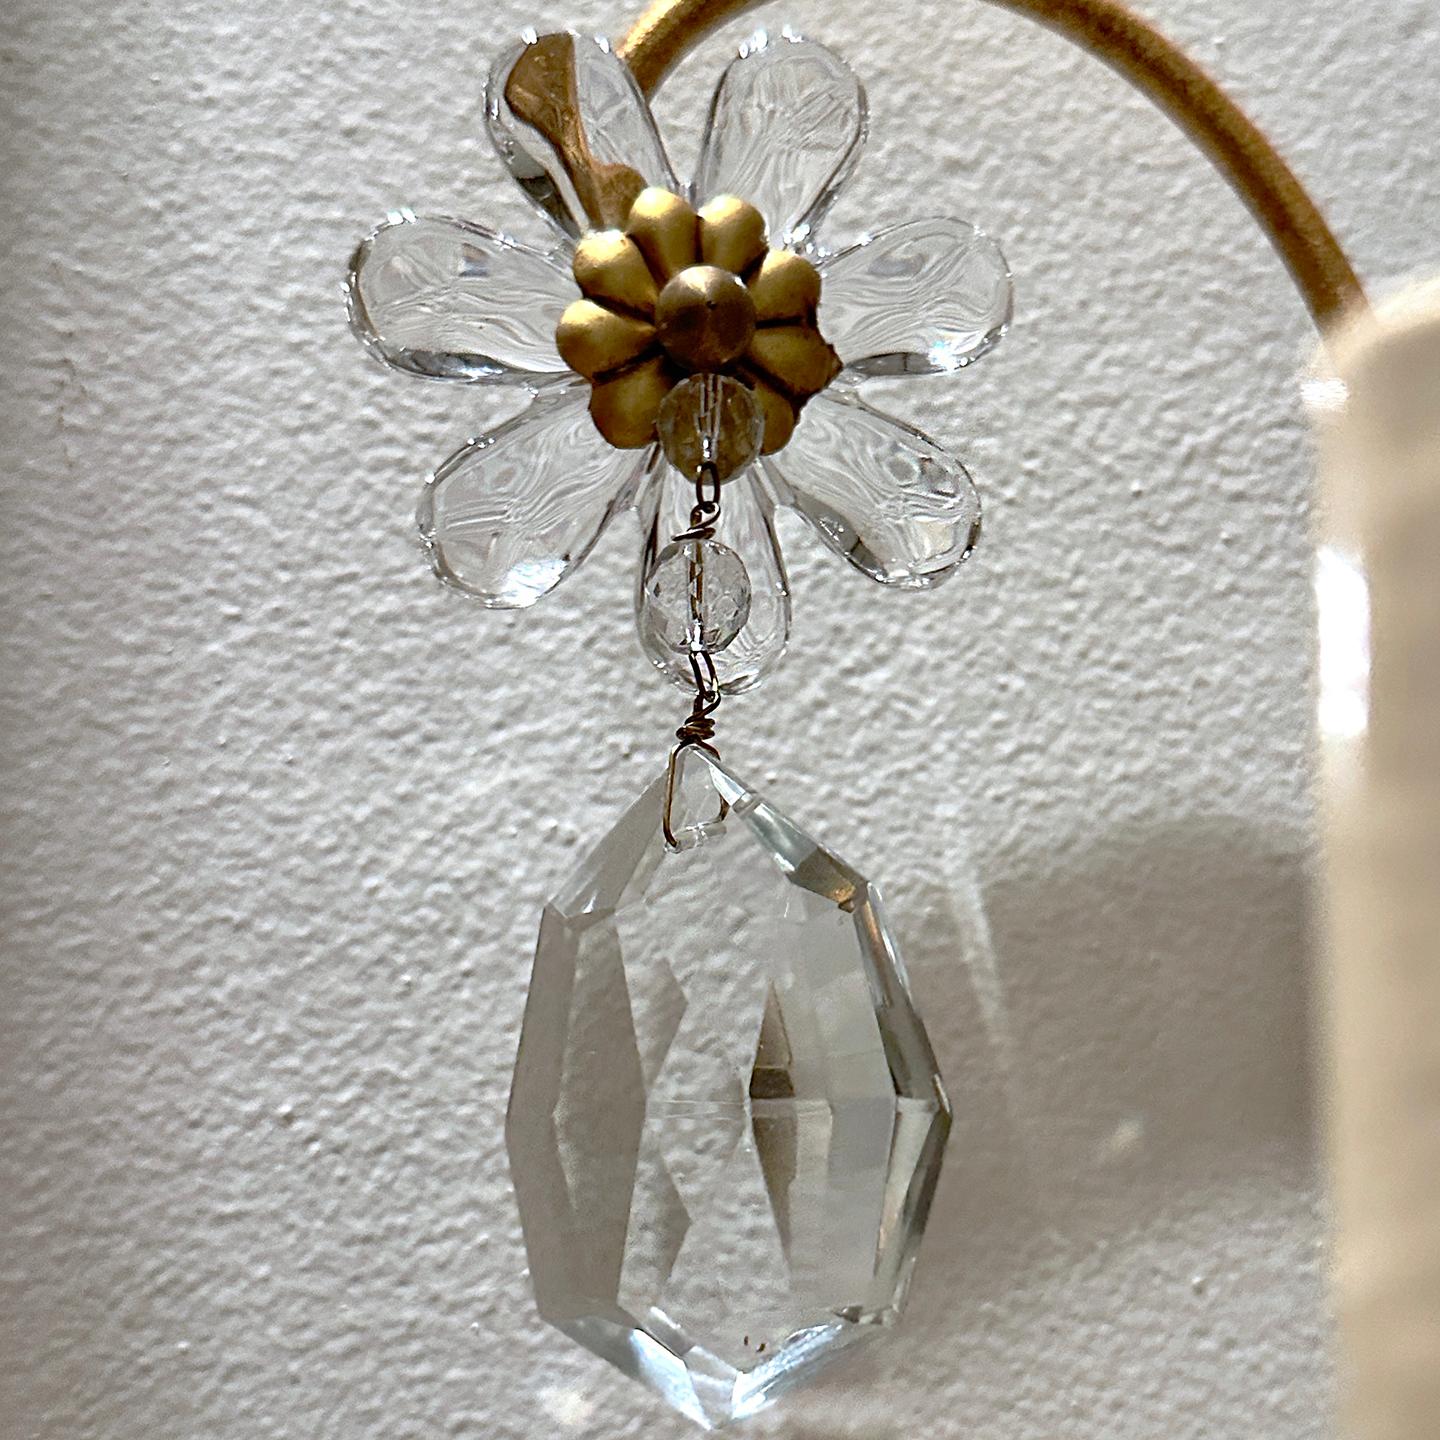 A single circa 1950's French large sconce with 2 lights and crystal body.

Measurements:
Height: 26